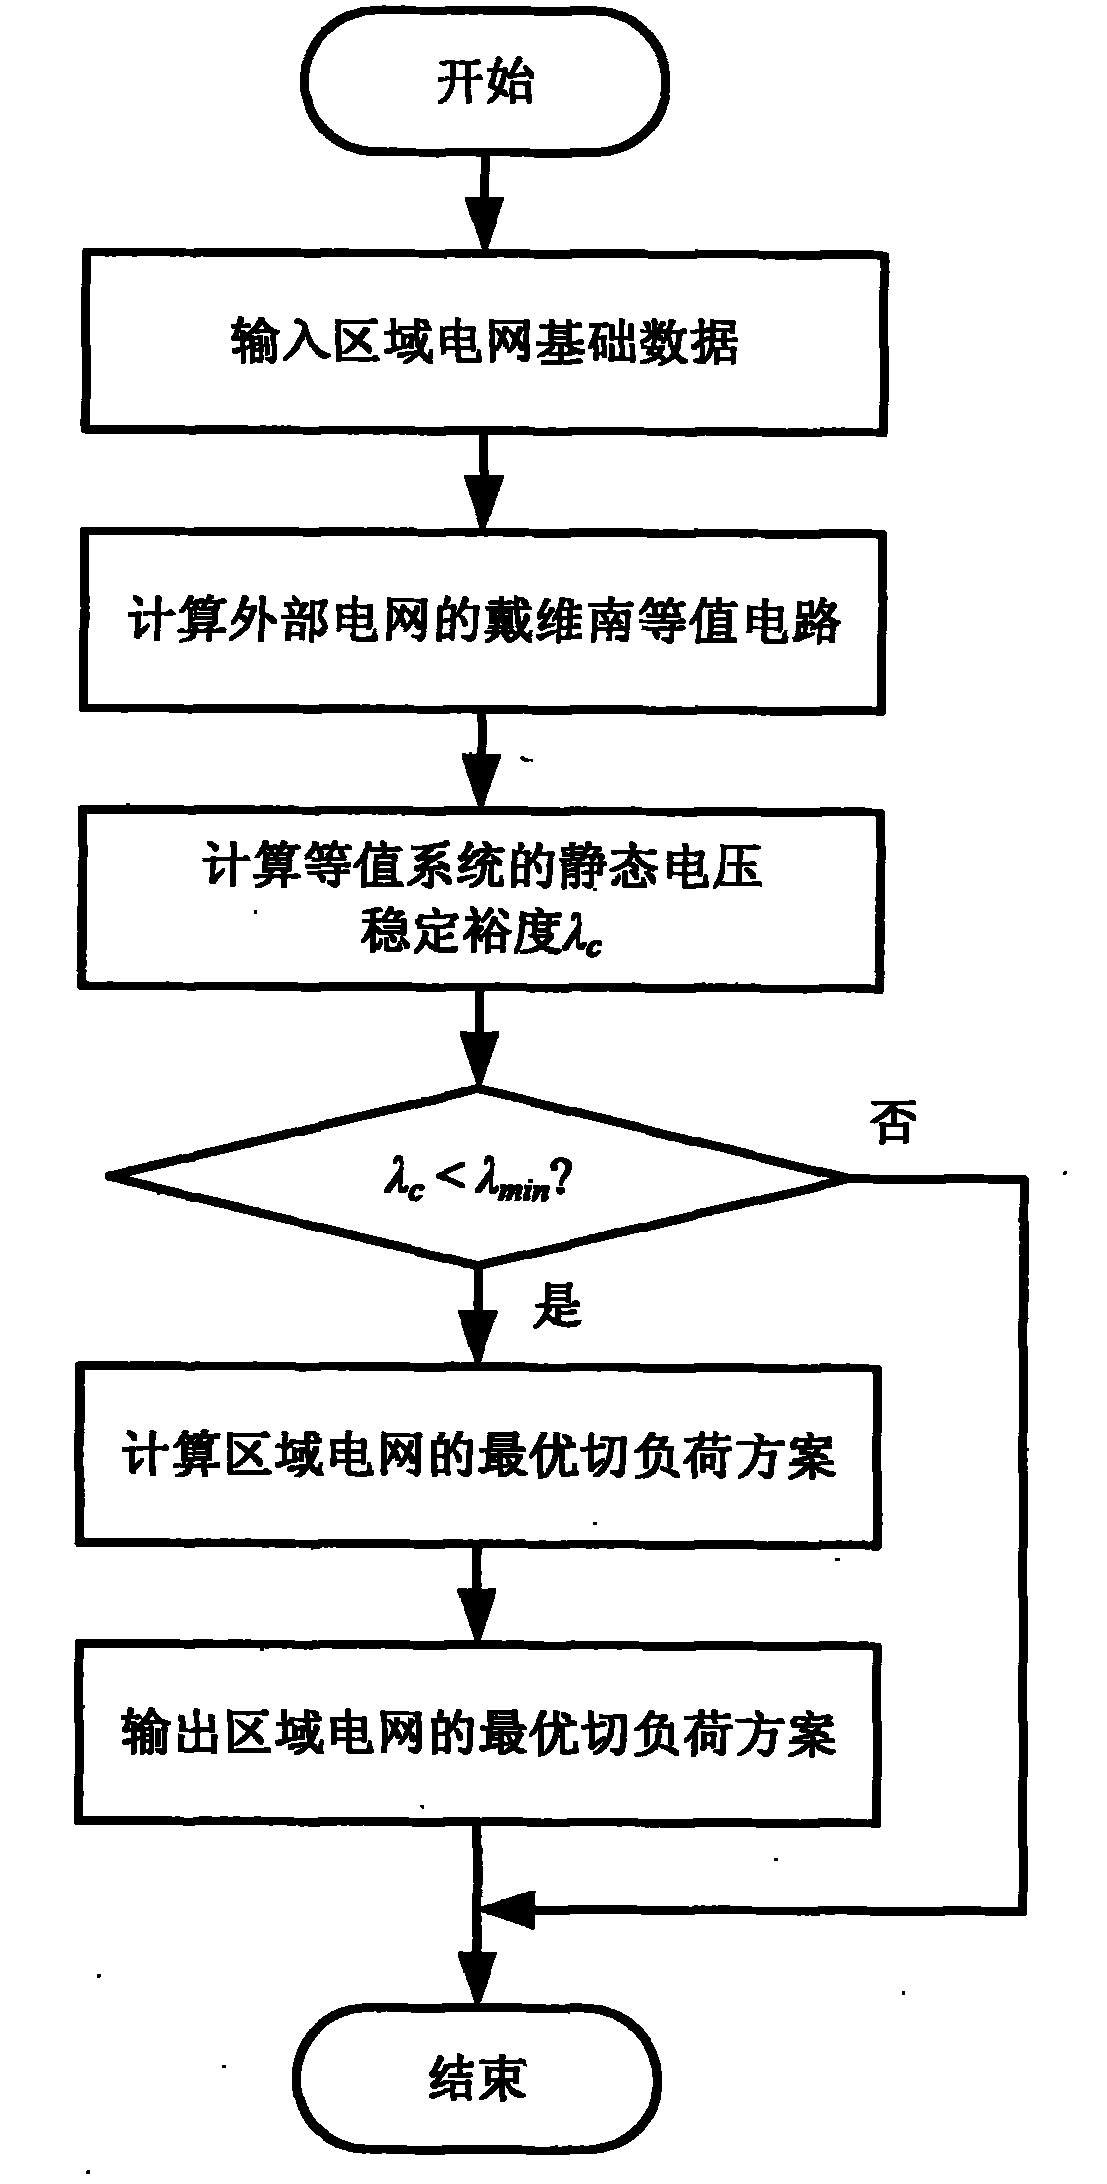 Wide area load shedding control method for quiescent voltage stabilization considering external power grid equivalence